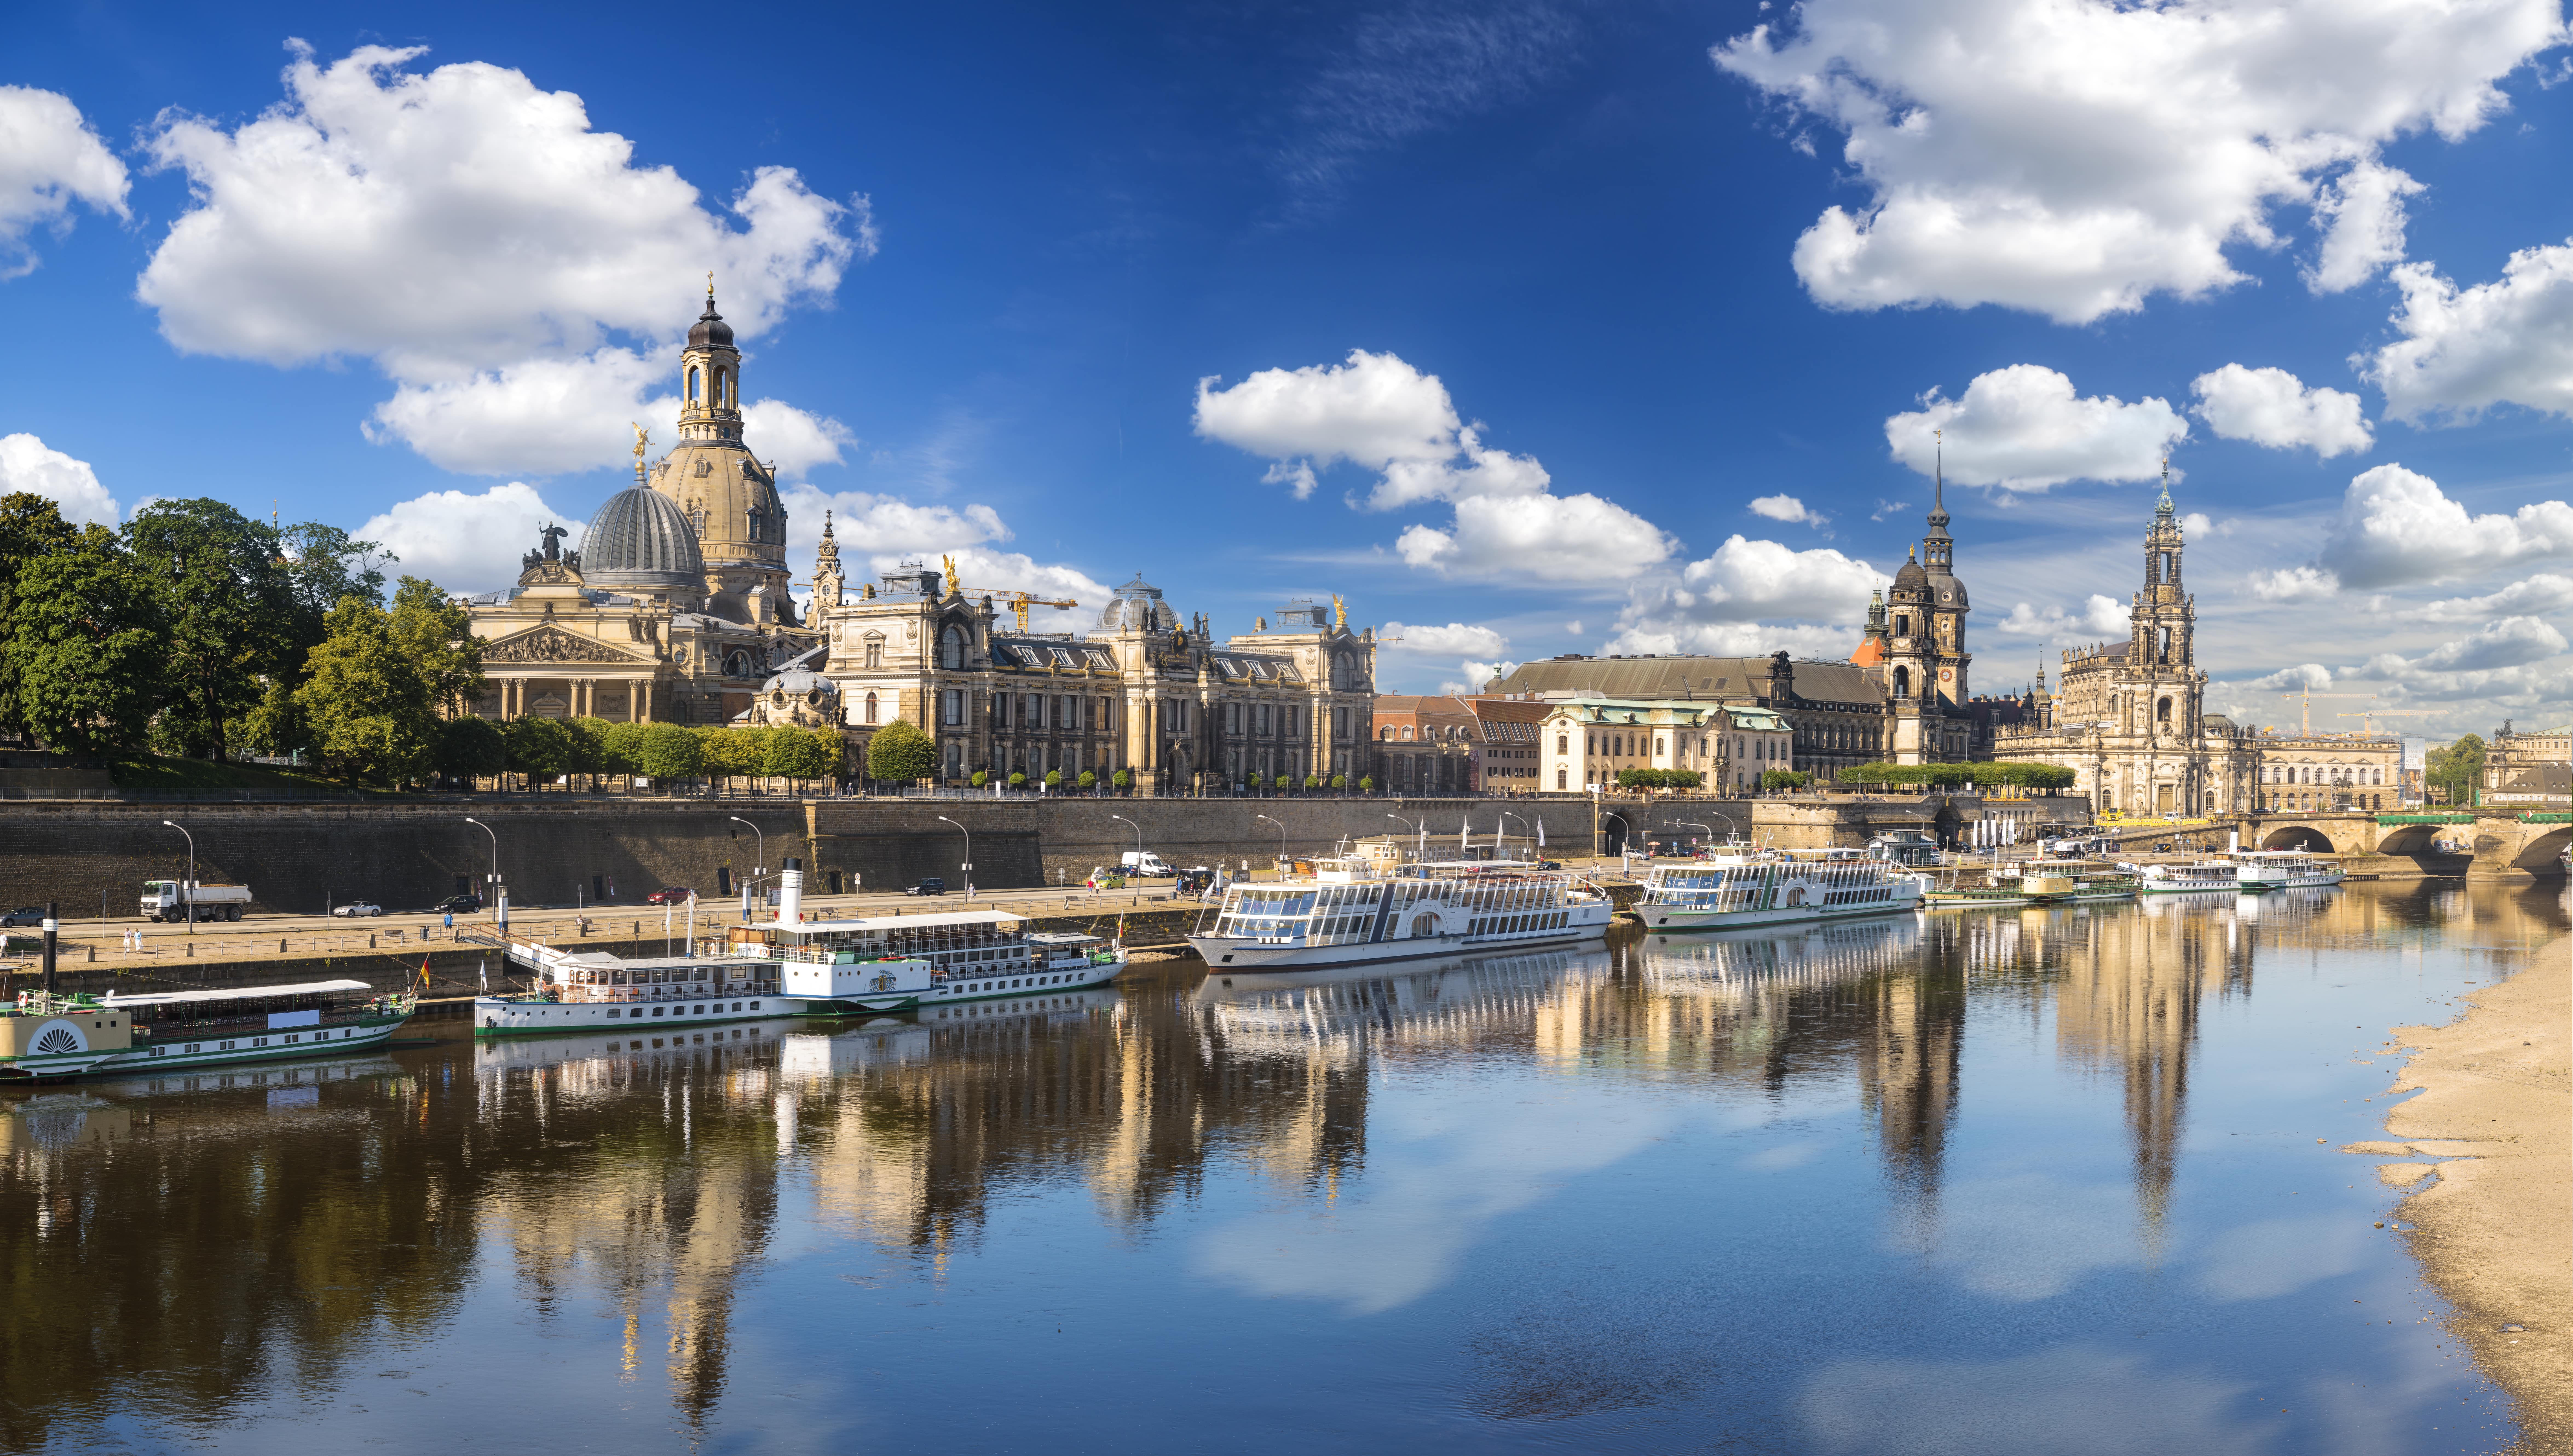 A view of Dresden from the water